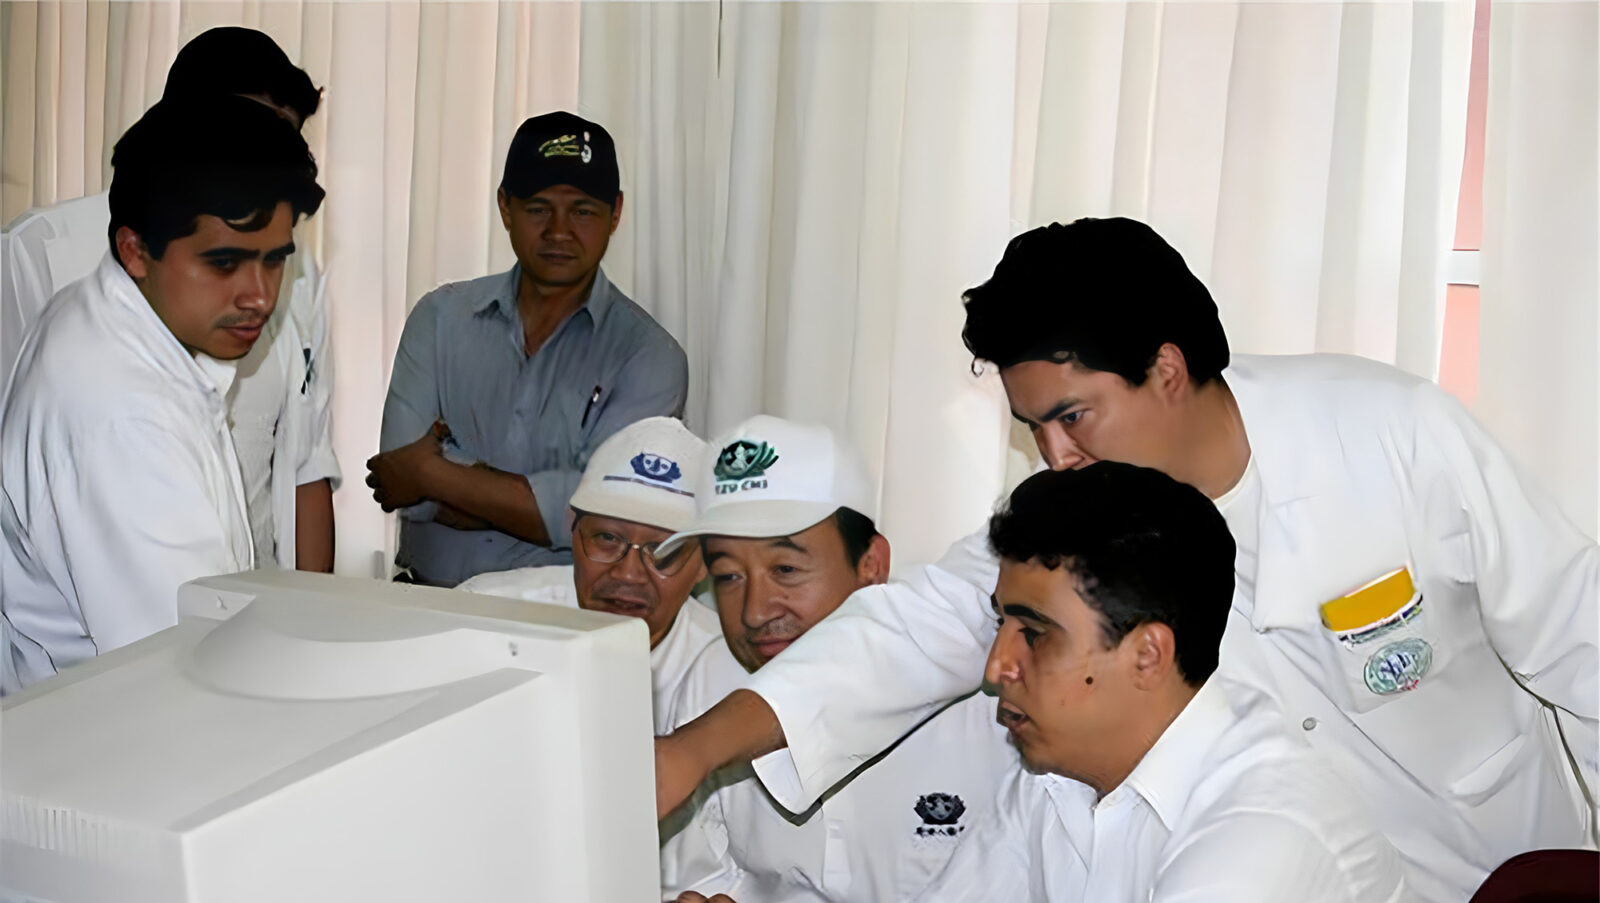 Dr. Mathew Y. C. Lin (third from right) of TIMA with orthopedic surgeons at the Hospital Municipal Frances in Bolivia.